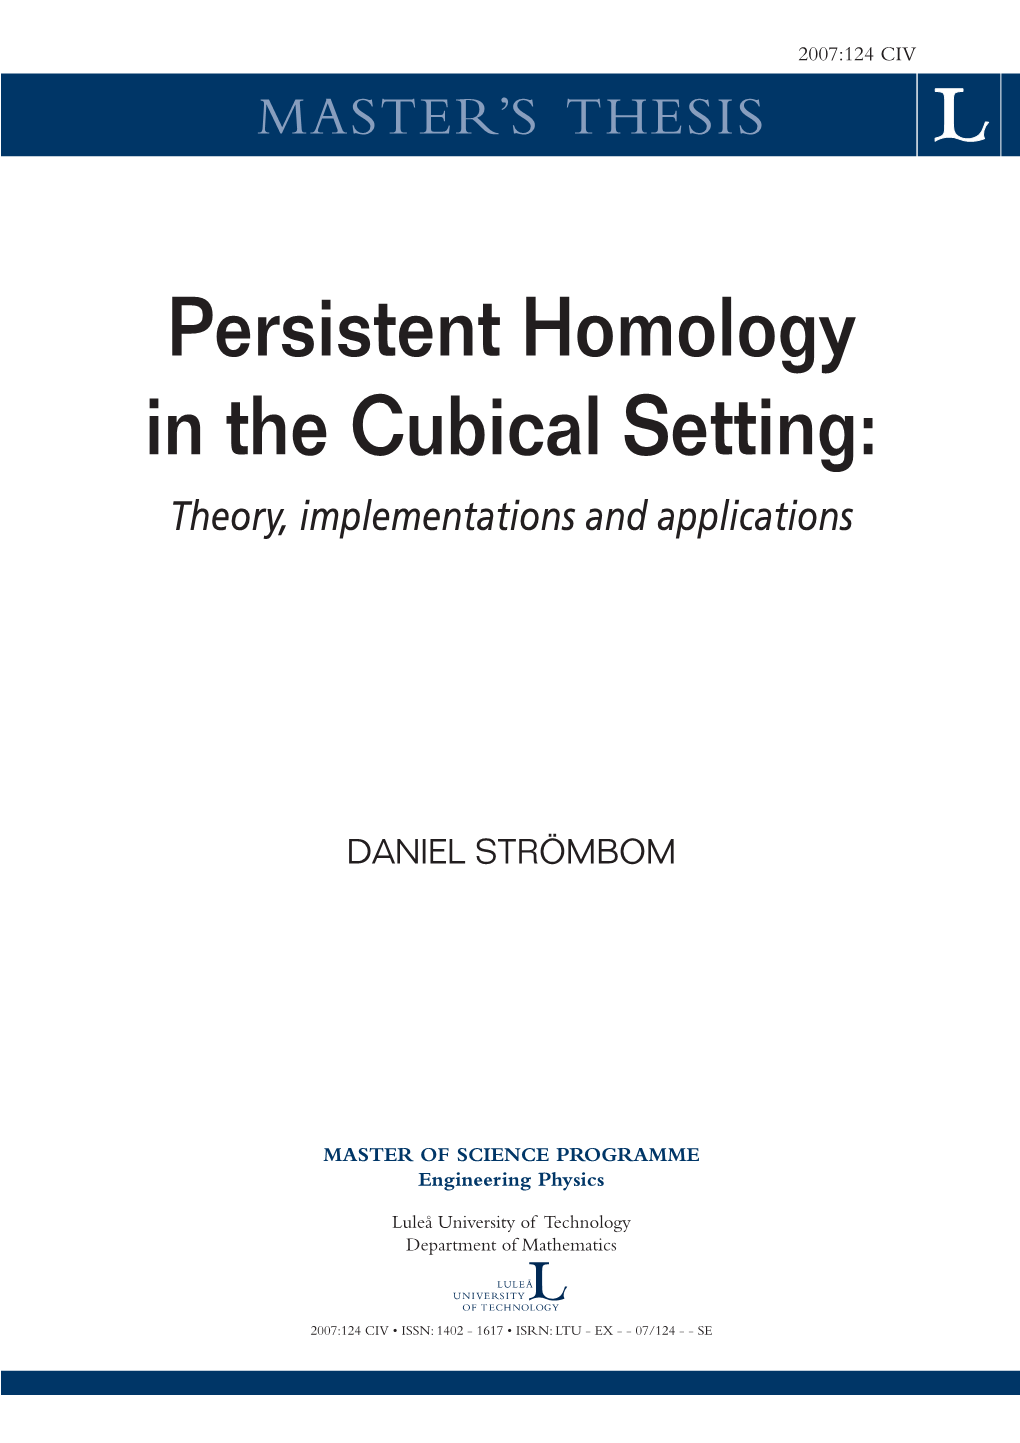 Persistent Homology in the Cubical Setting: Theory, Implementations and Applications